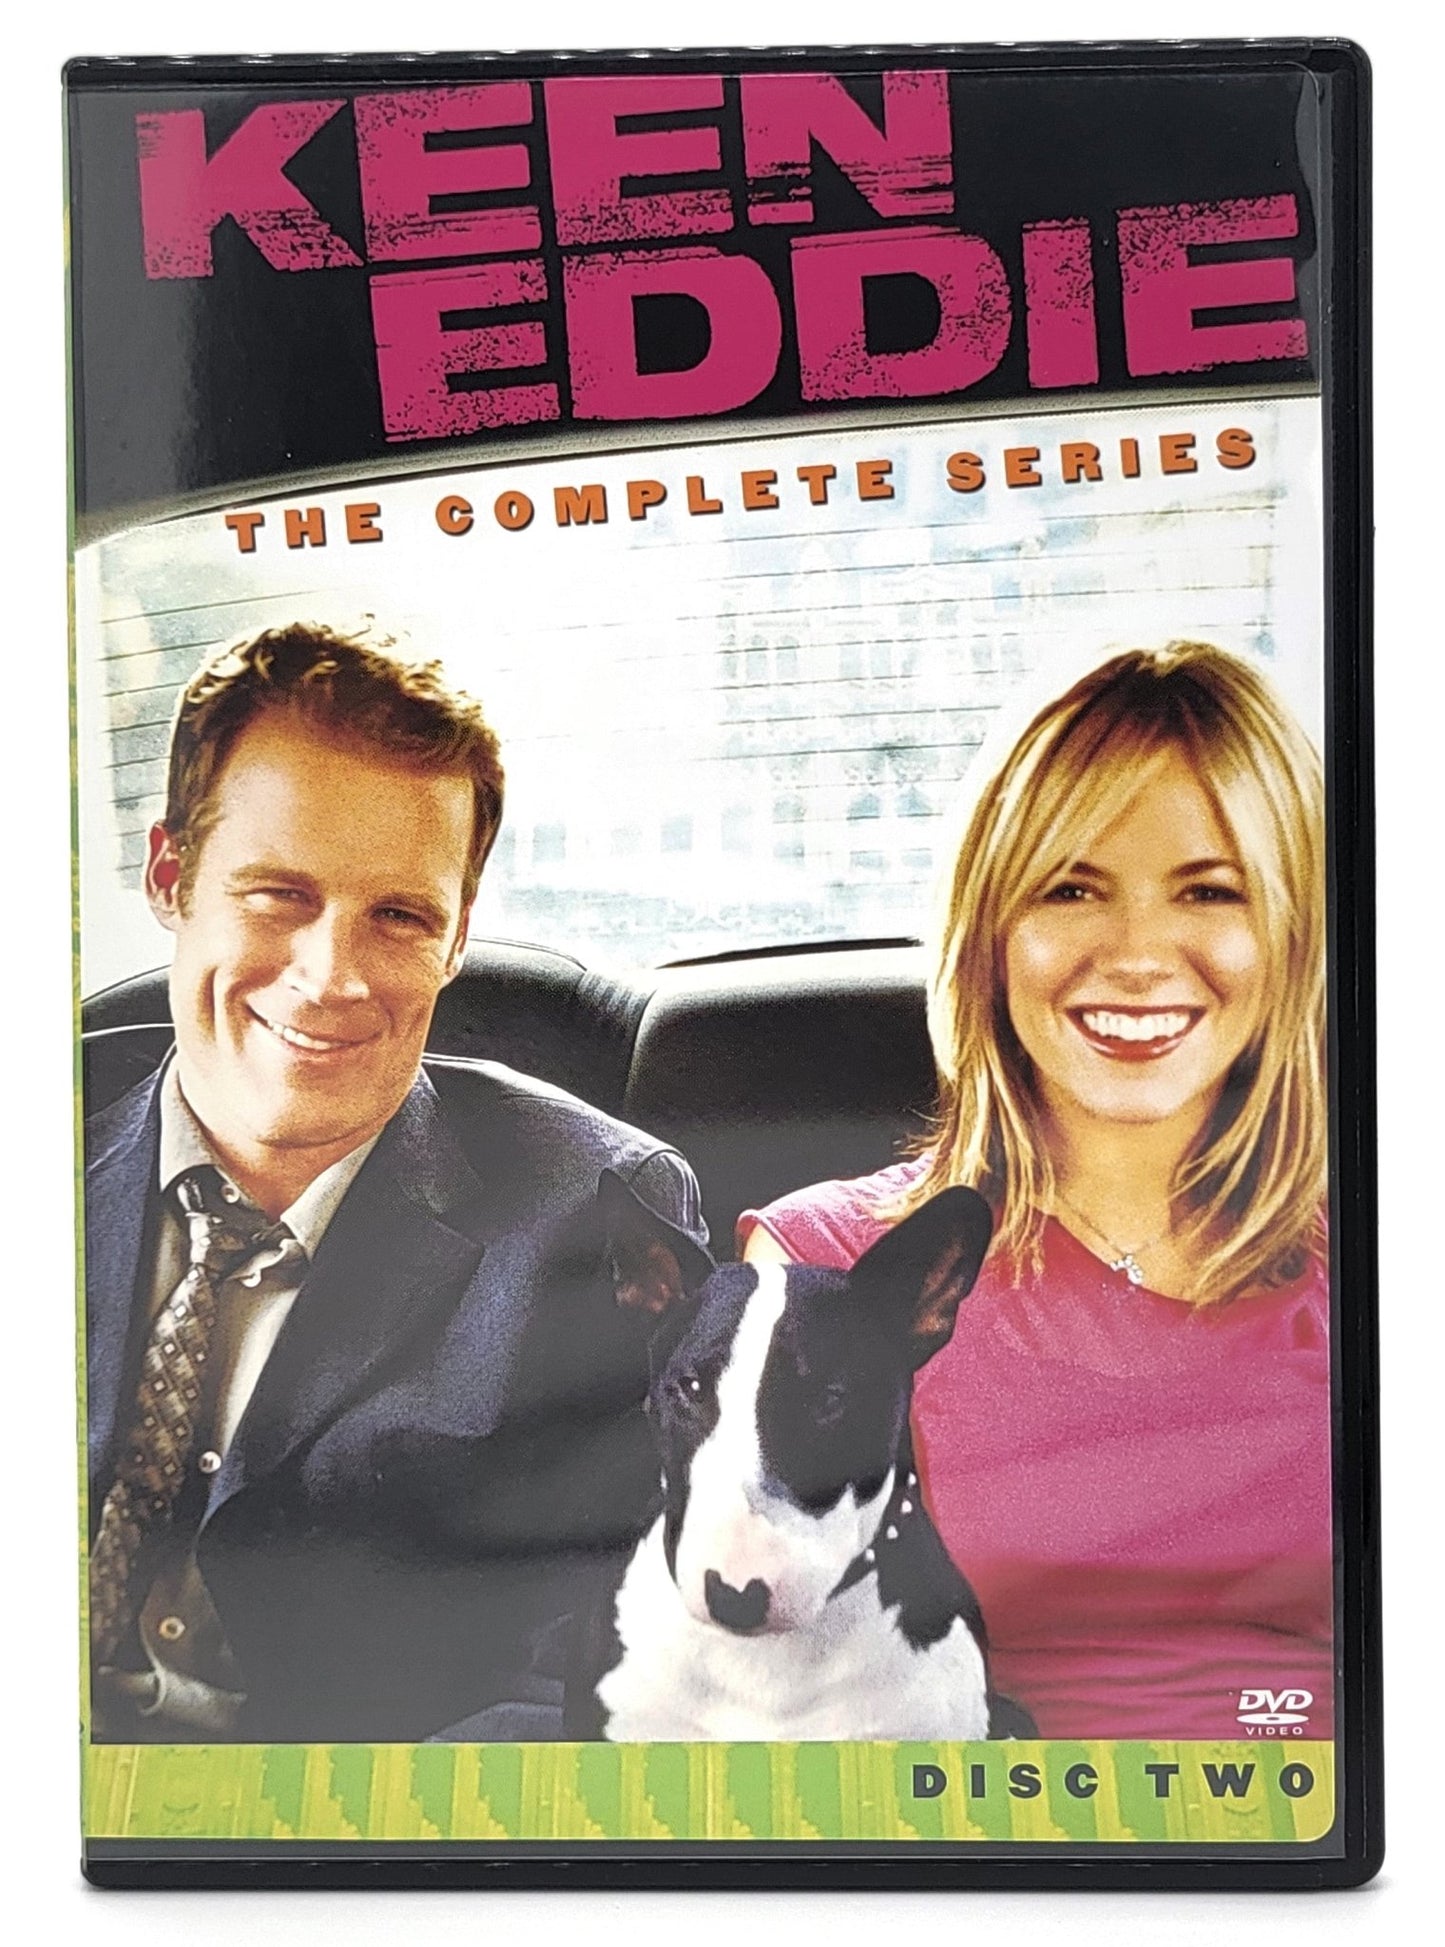 Paramount Home Entertainment - Keen Eddie | DVD | The Complete Series - DVD - Steady Bunny Shop